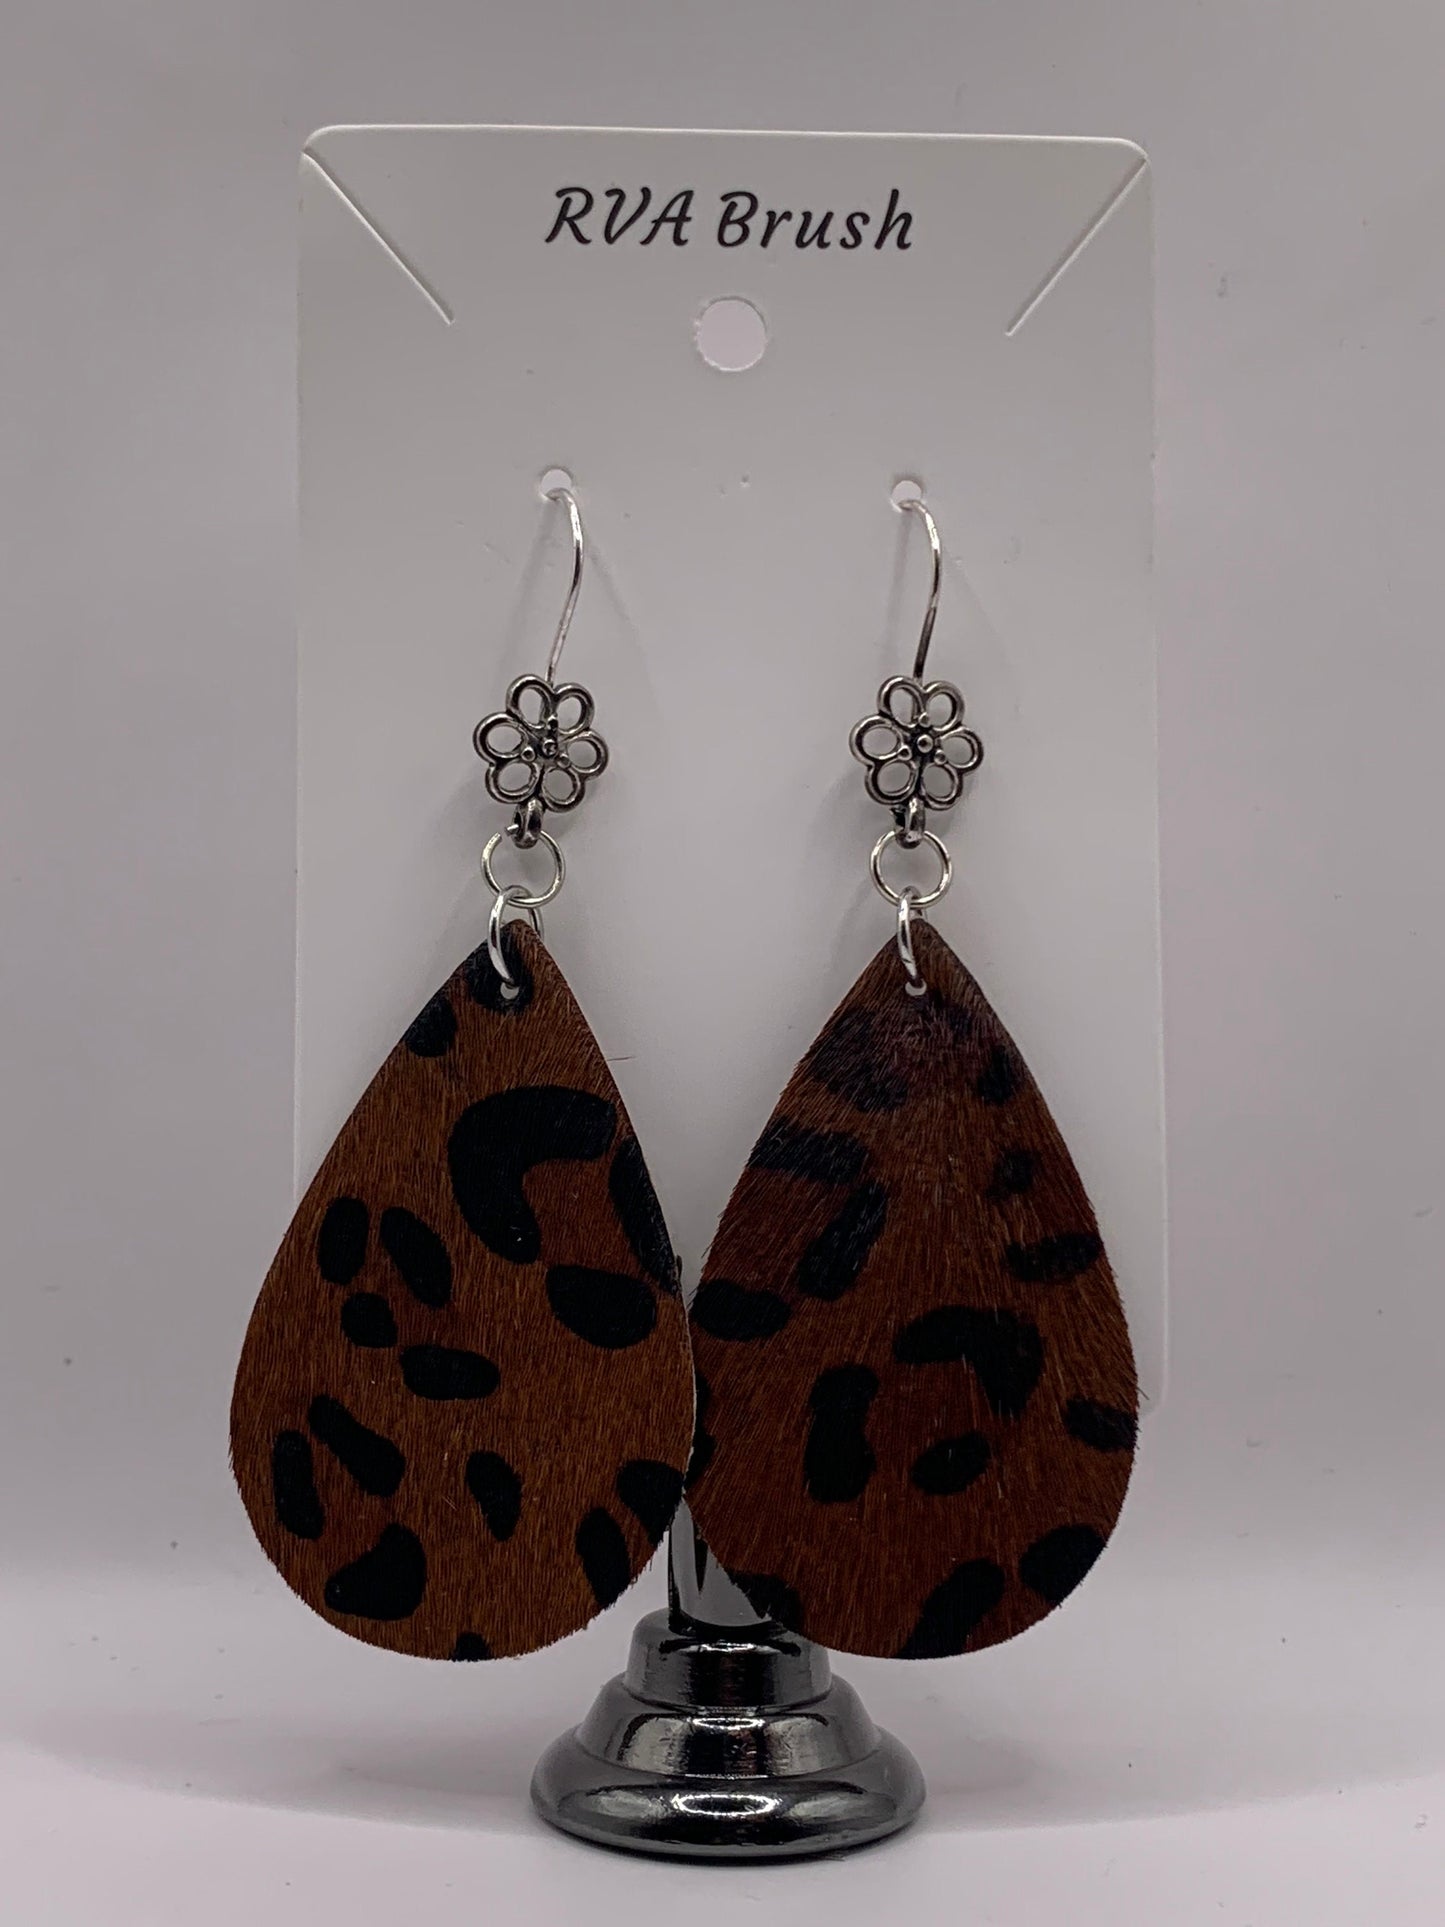 106- Leopard Print Teardrop Earrings with Floral Silver Charm, Trendy Animal Pattern Accessory, Unique Fashion Statement, Gift for Her